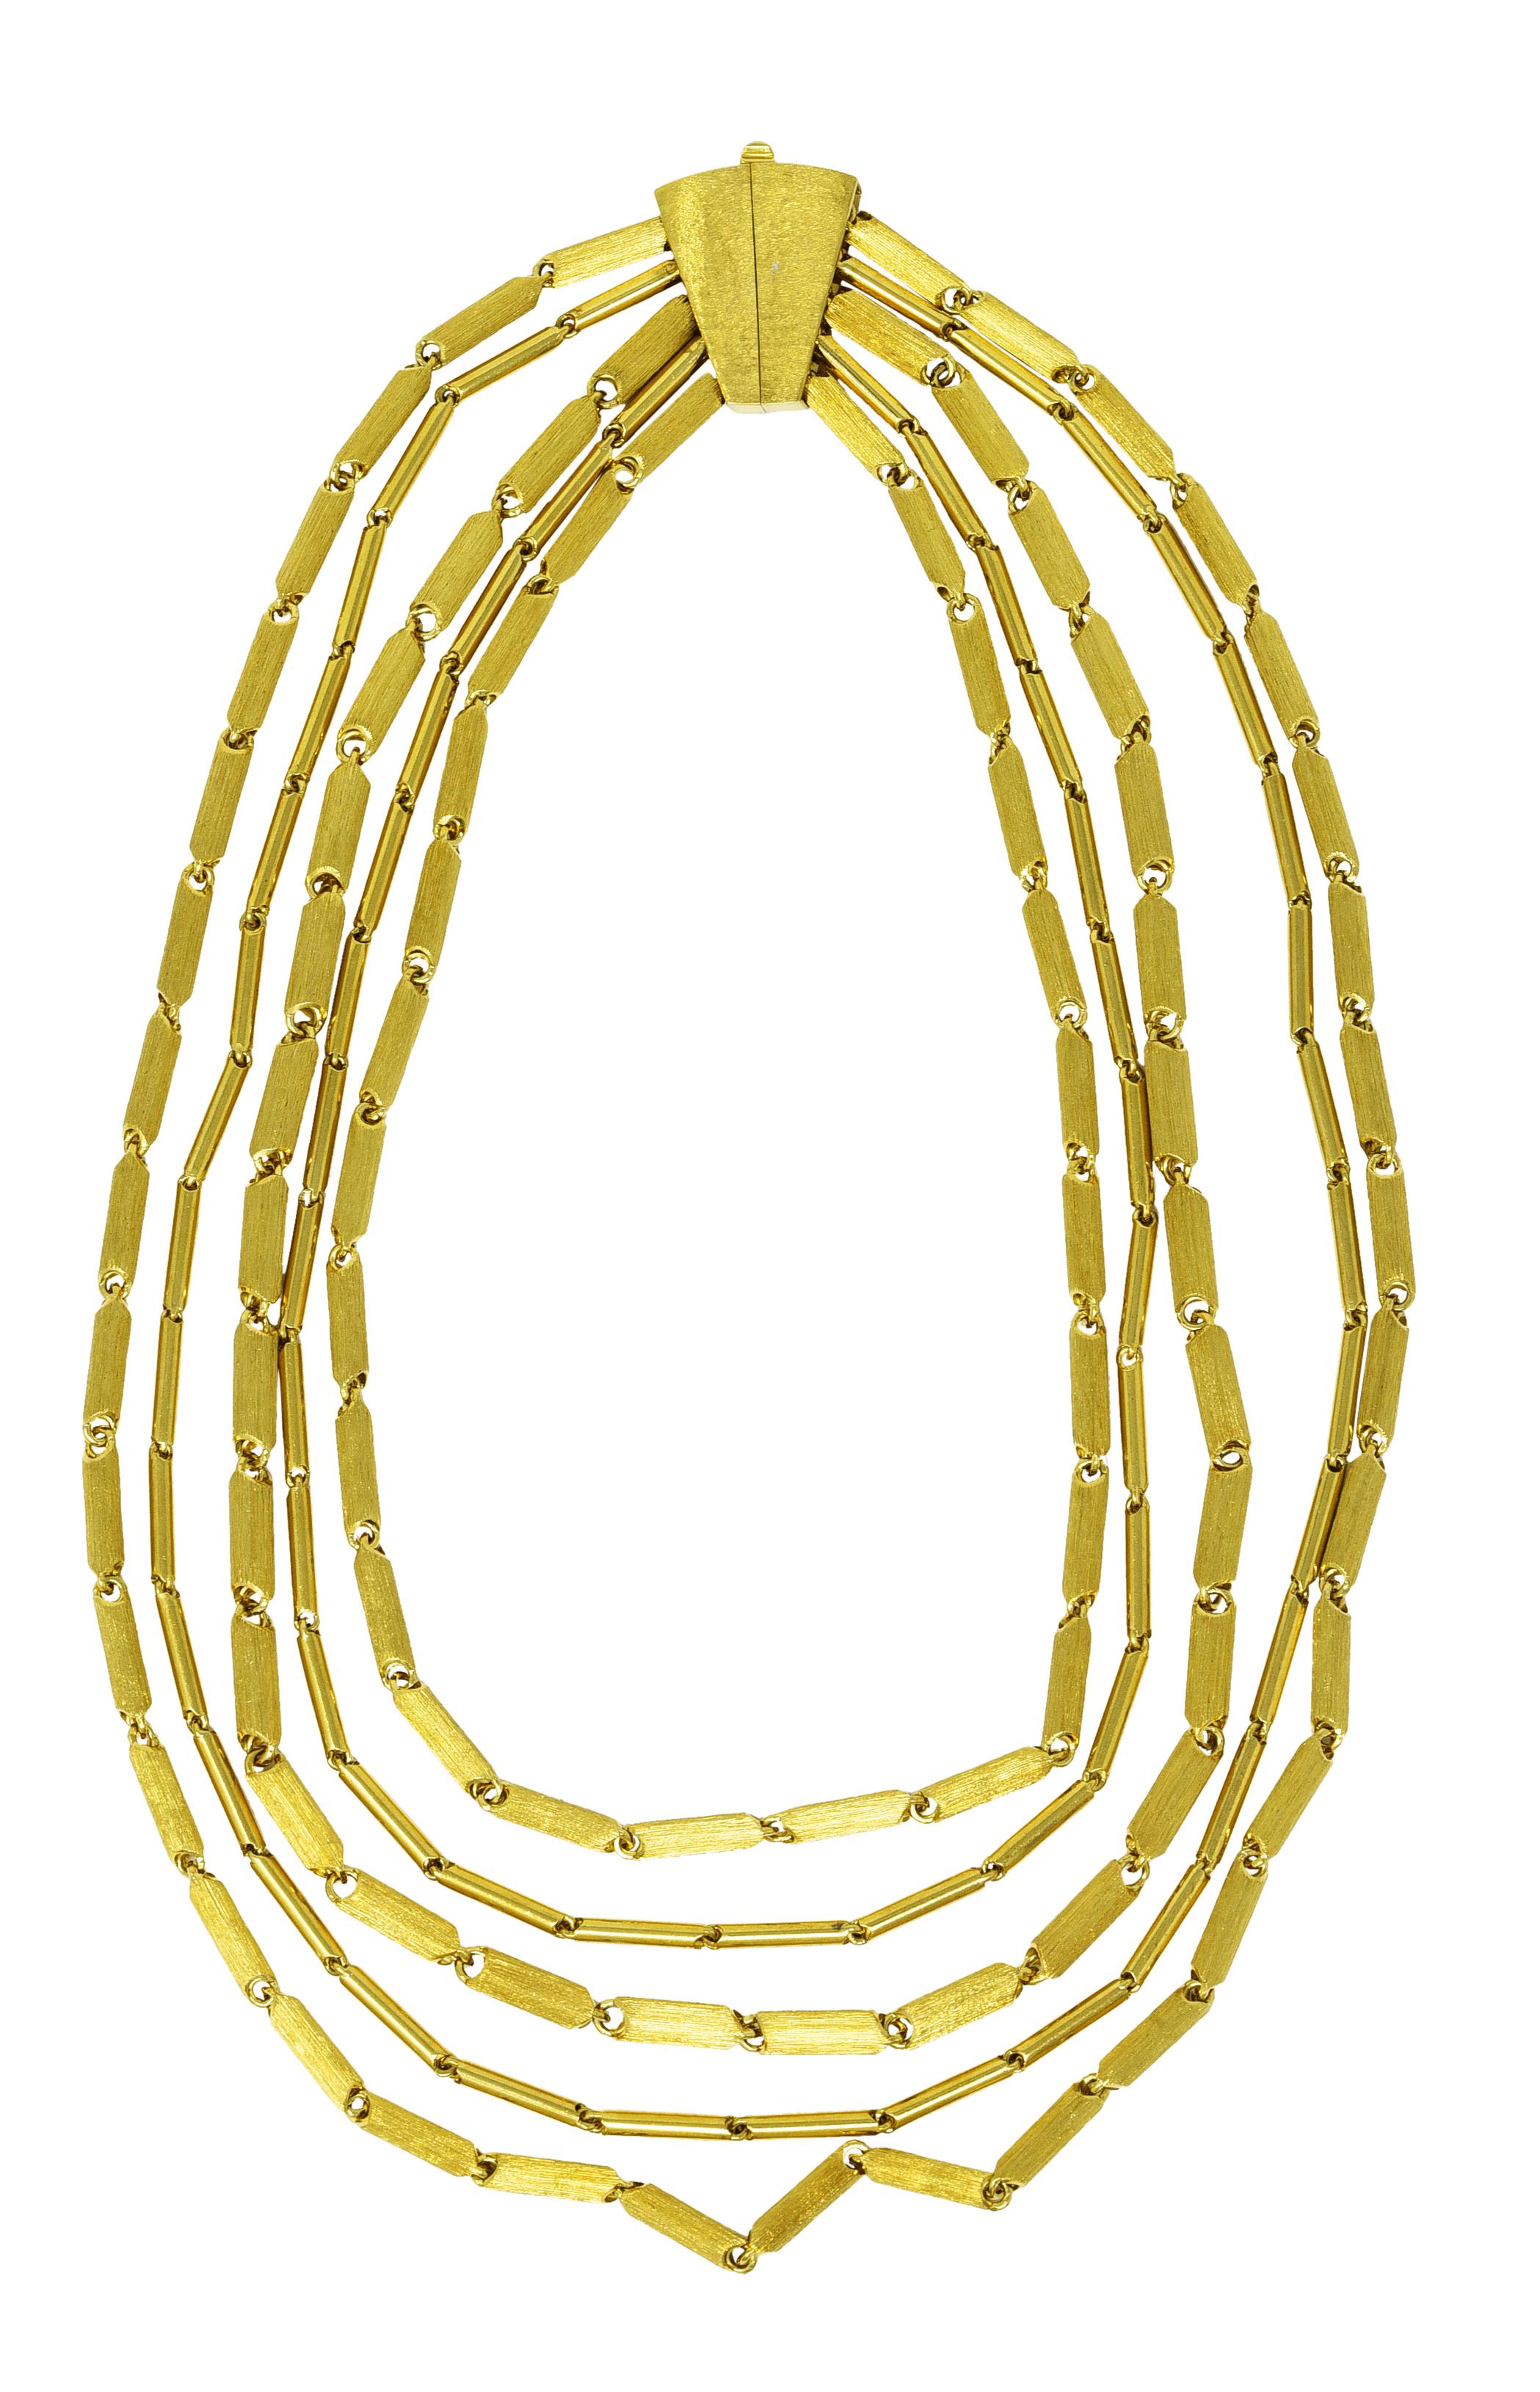 Henry Dunay 18 Karat Yellow Gold Multi-Strand Chain Link Vintage Necklace 4